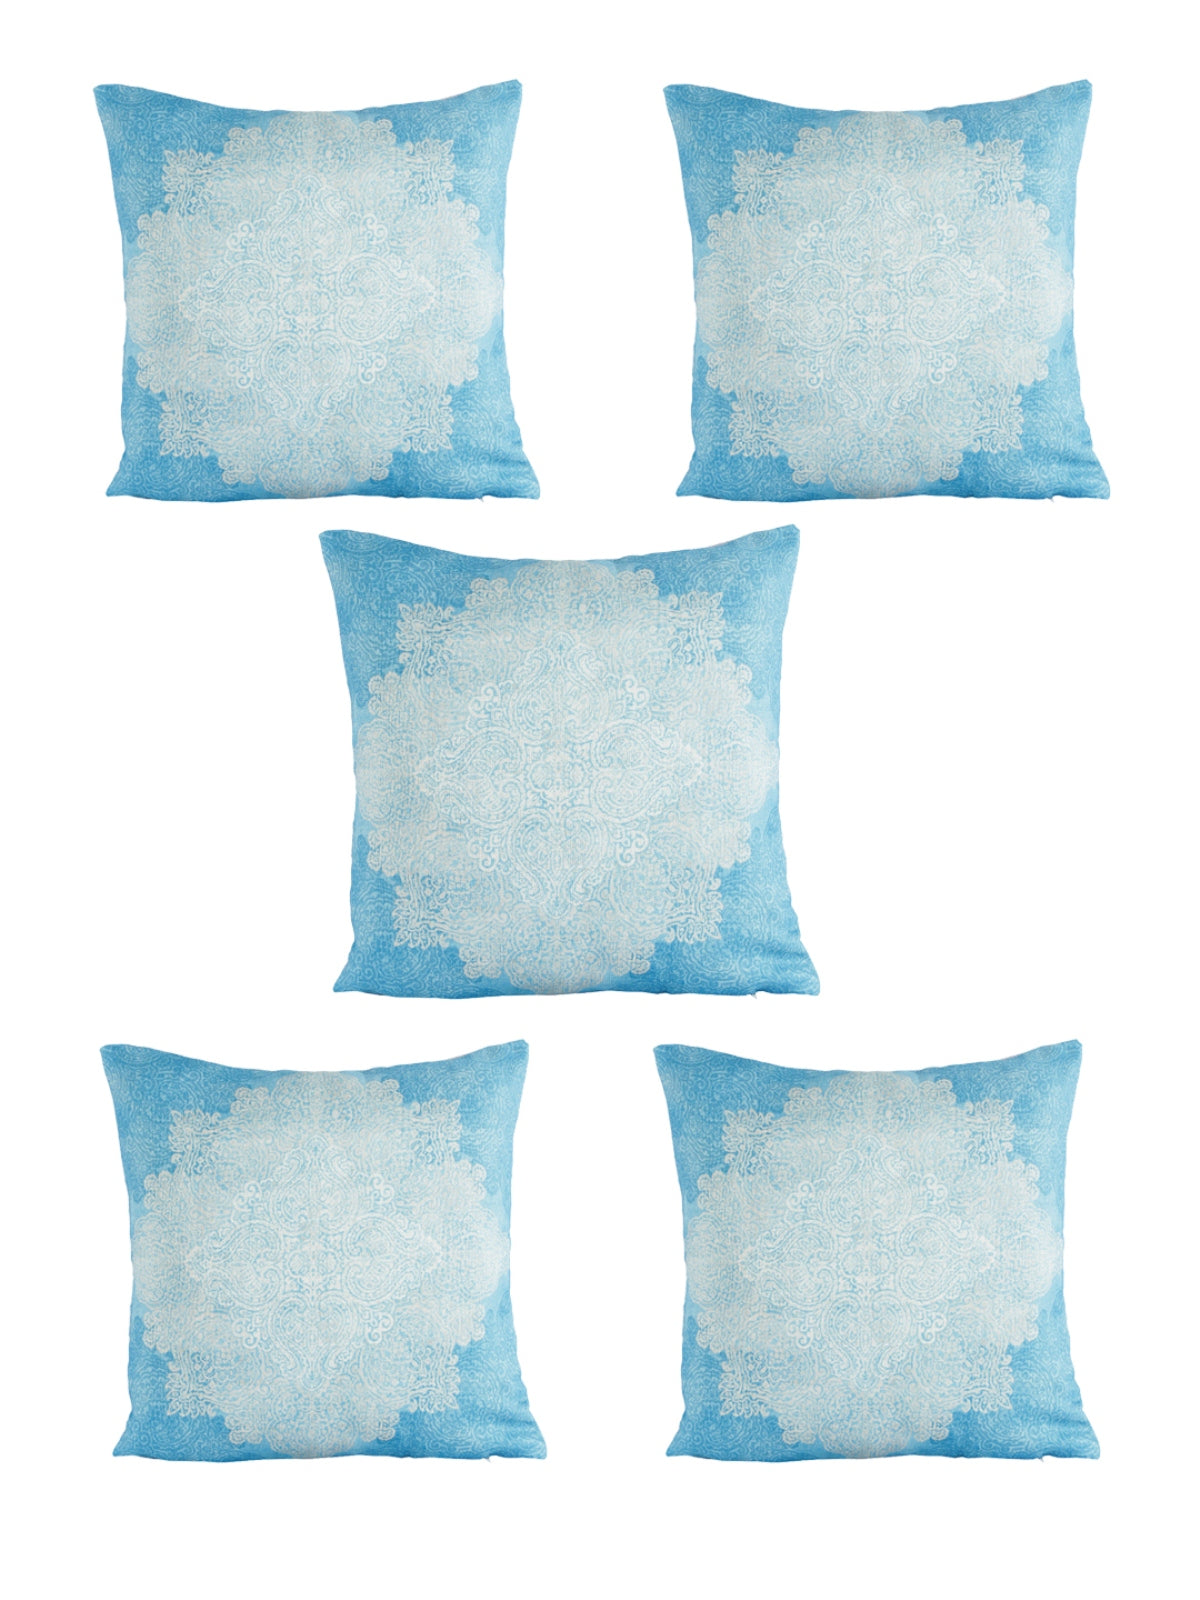 Ethnic Motifs Polyester Cushion Cover 16x16 Inch, Set of 5 - Turquoise Blue